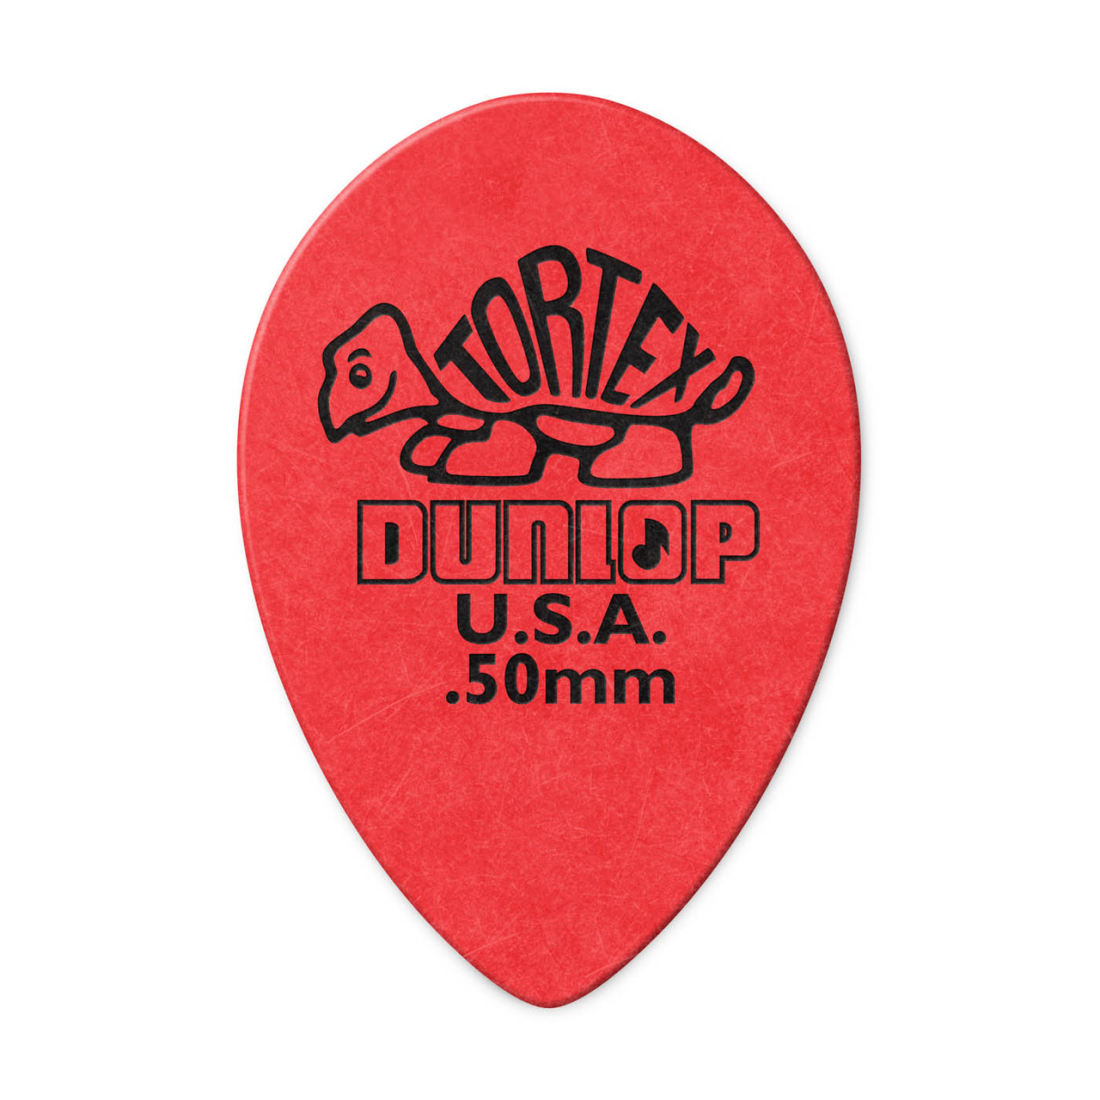 Tortex Small Teardrop Players Pack (36 Pack) - .50mm